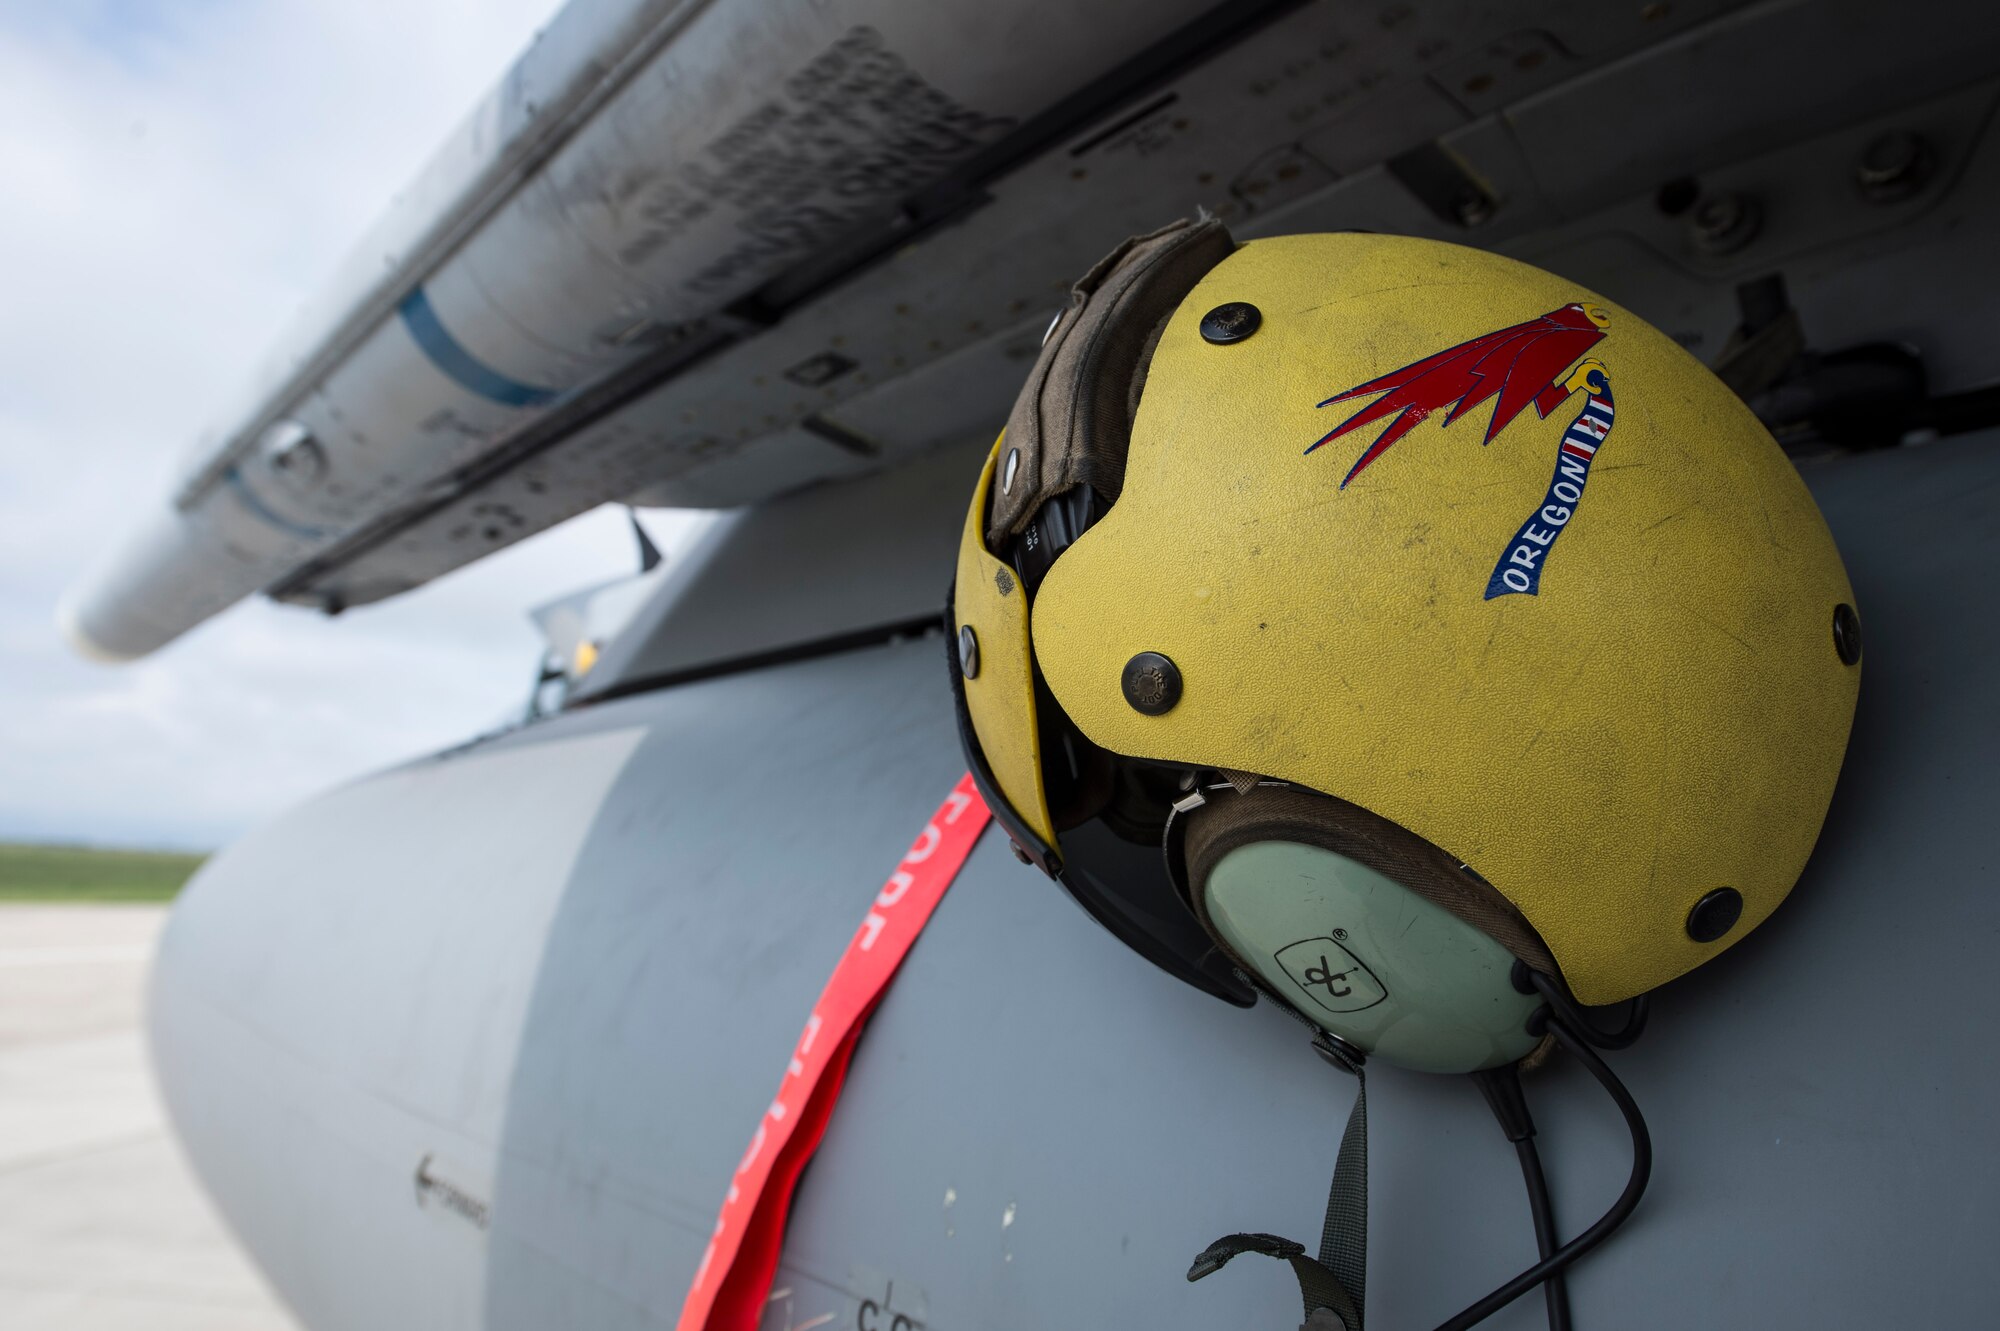 A 123rd Expeditionary Fighter Squadron, 142nd Fighter Wing, Oregon Air National Guard crew chief helmet hangs on an F-15C Eagle fighter aircraft during a theater security package deployment Sept. 25, 2015, at Campia Turzii, Romania. U.S. Air Force Airmen and support equipment from the 142nd FW and the 52nd Fighter Wing at Spangdahlem Air Base, Germany, supported this deployment. (U.S. Air Force photo by Staff Sgt. Christopher Ruano/Released)